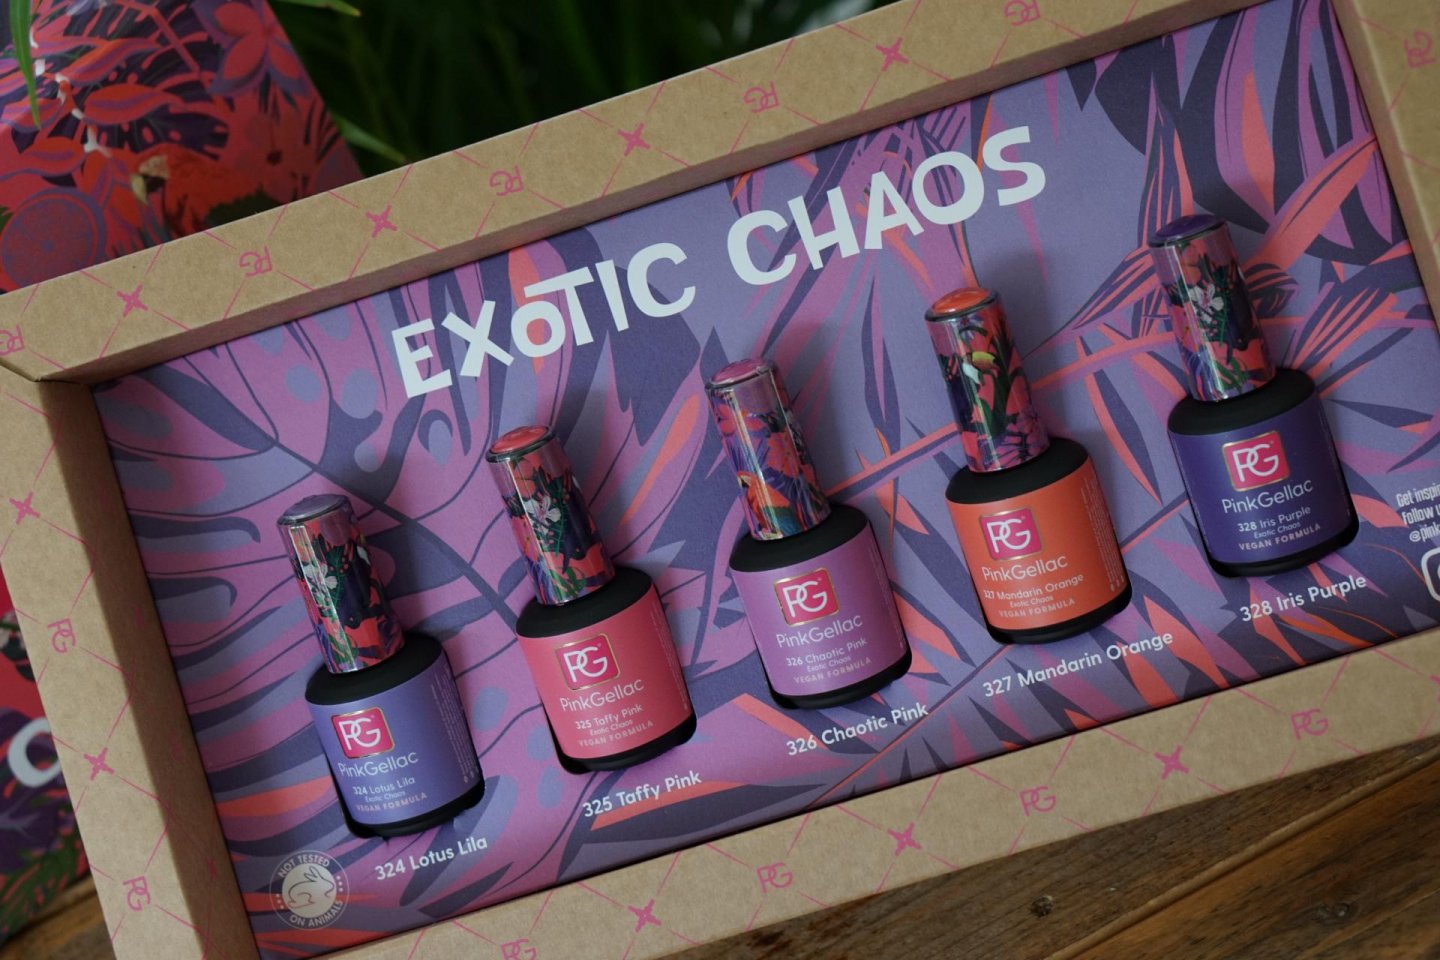 Pink Gellac Exotic Chaos collectie swatches